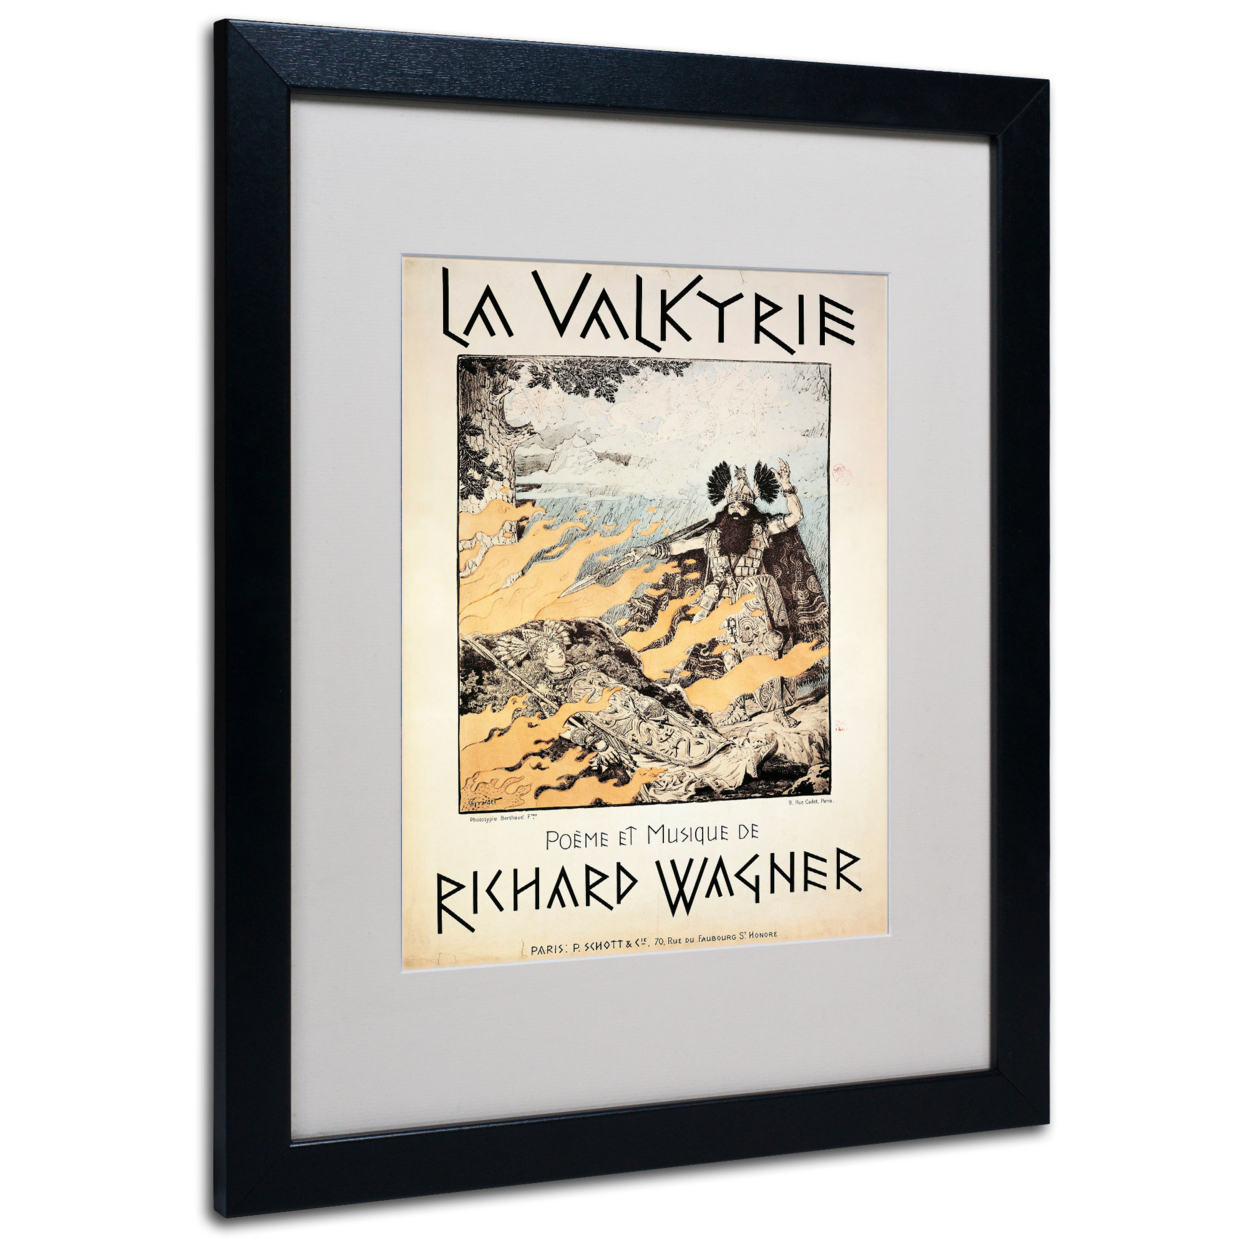 Richard Wagner 'Poster Of The Valkyrie' Black Wooden Framed Art 18 X 22 Inches